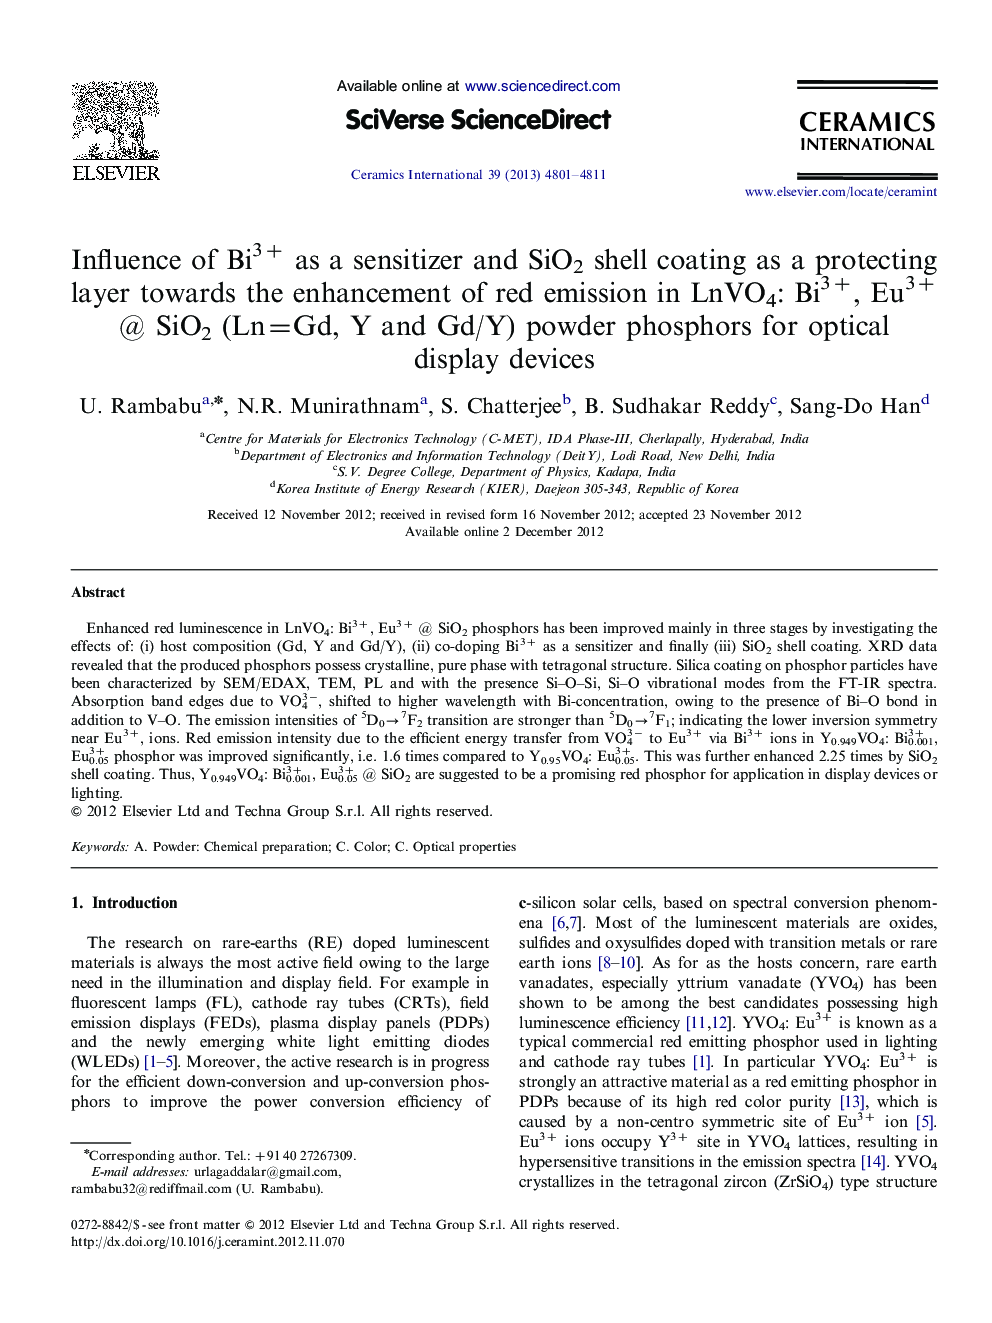 Influence of Bi3+ as a sensitizer and SiO2 shell coating as a protecting layer towards the enhancement of red emission in LnVO4: Bi3+, Eu3+ @ SiO2 (Ln=Gd, Y and Gd/Y) powder phosphors for optical display devices